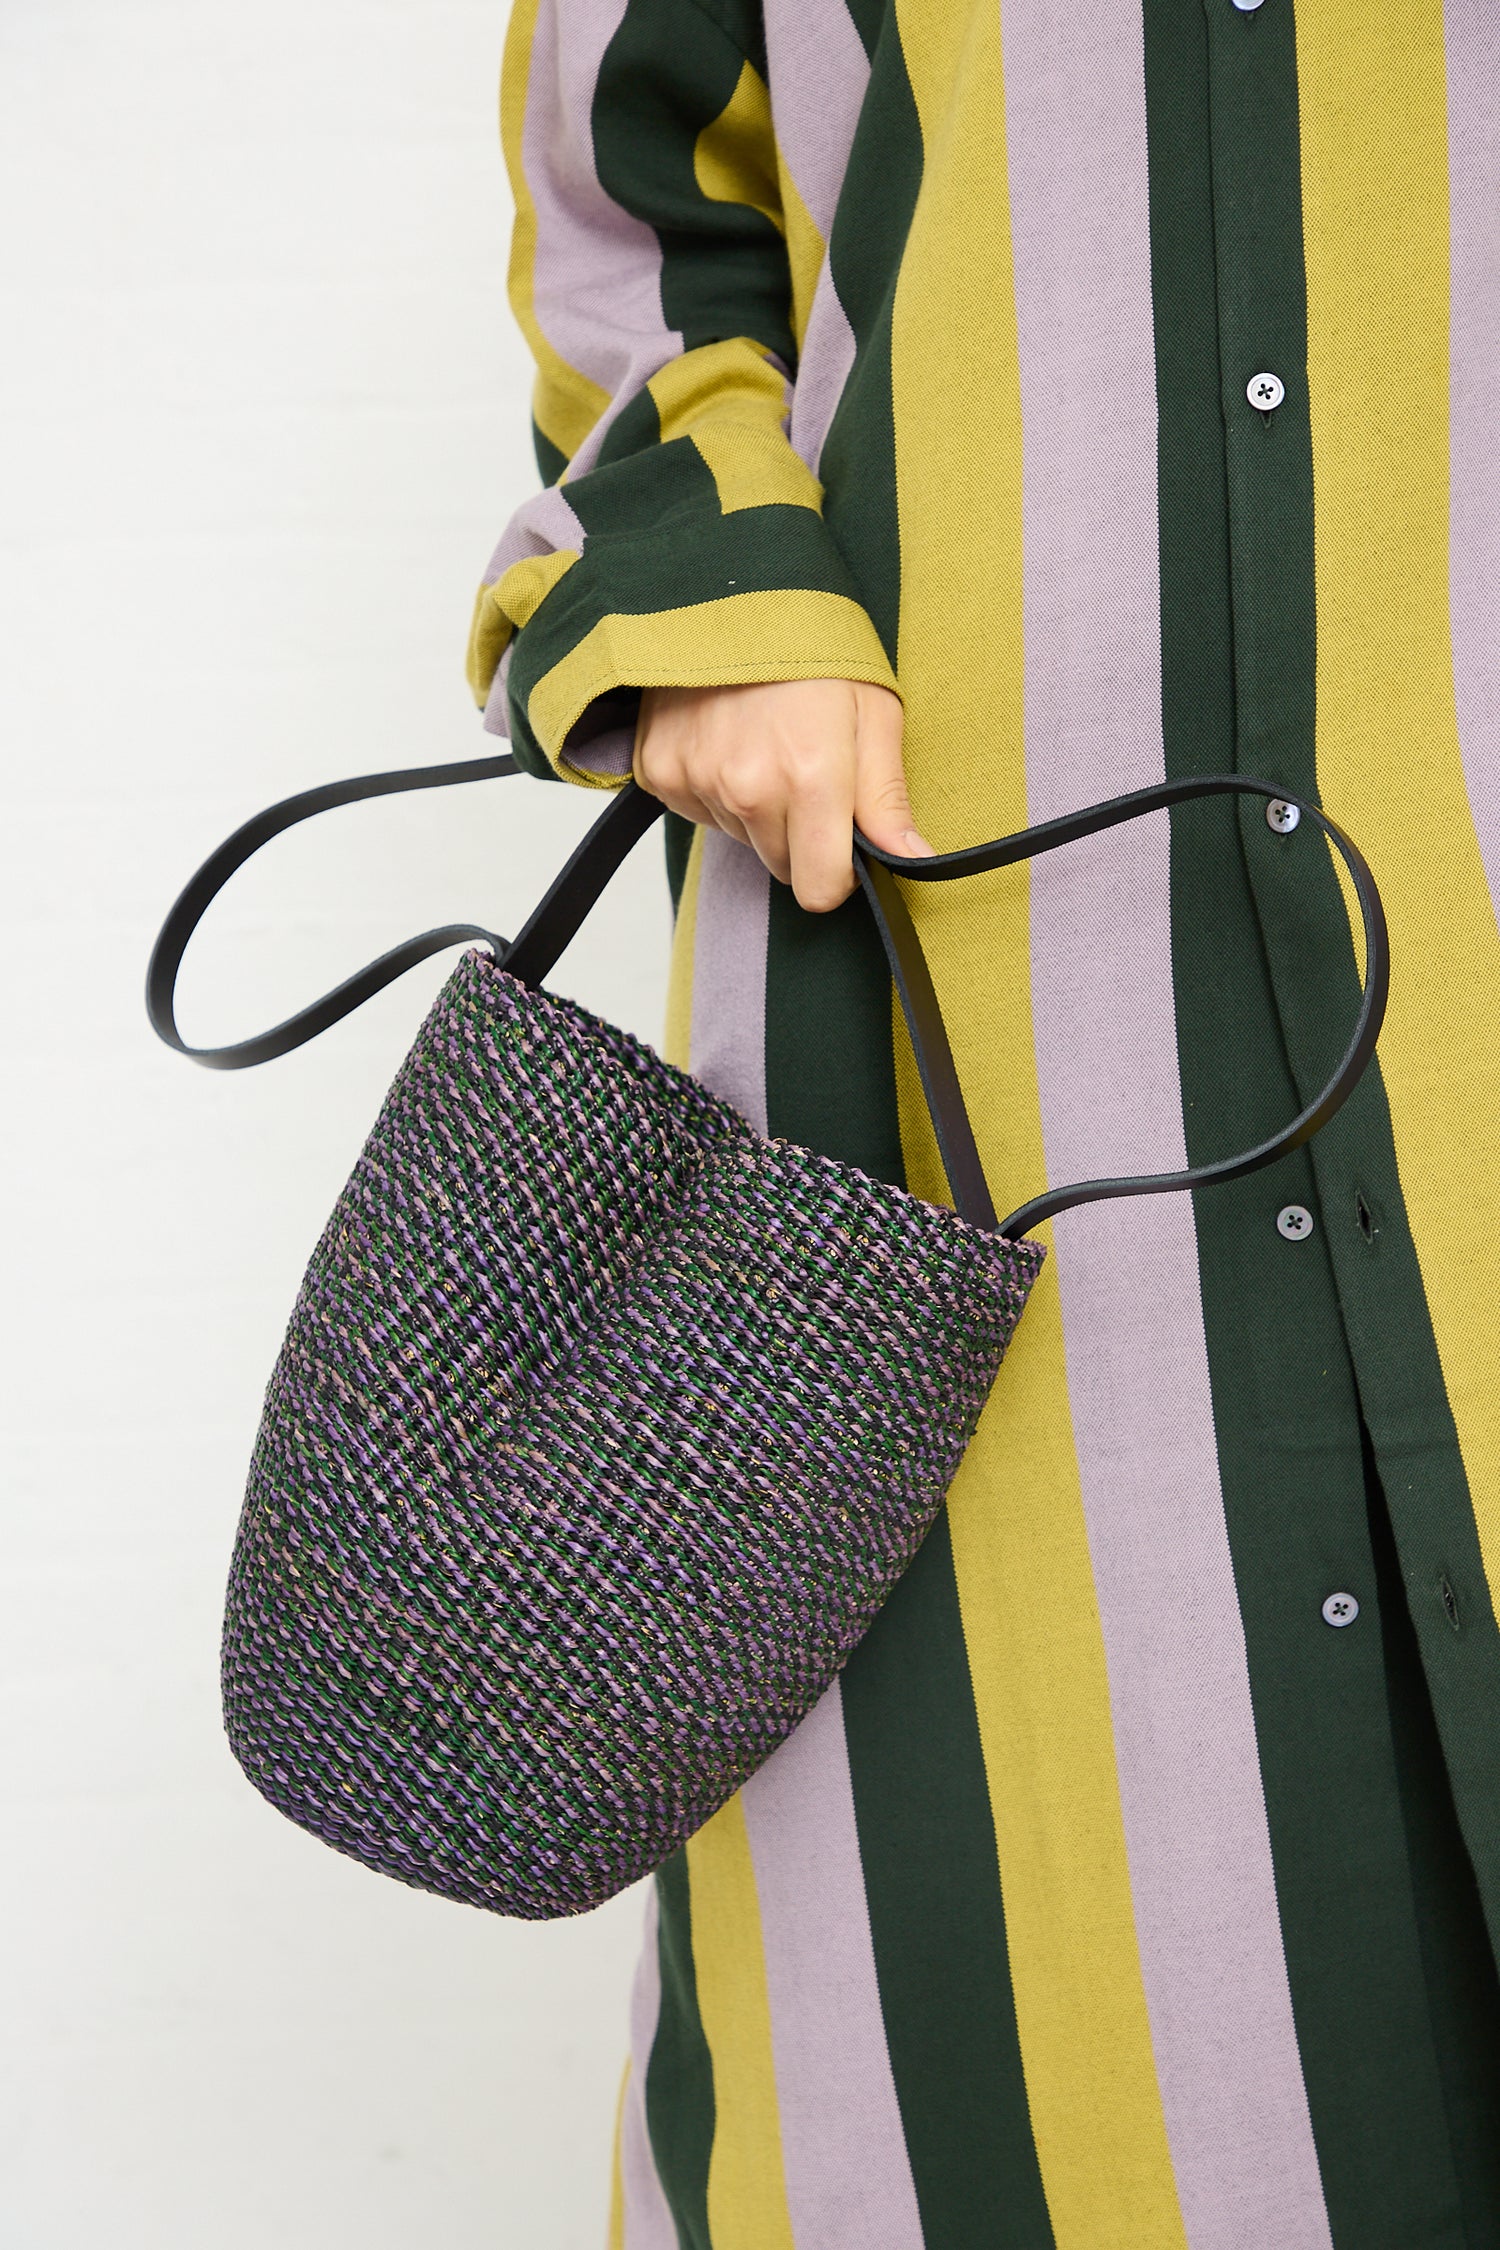 A person holding a N. 36 Haricot Bag in Green by Inès Bressand with vegetable-tanned leather handles while wearing a green and yellow striped shirt.